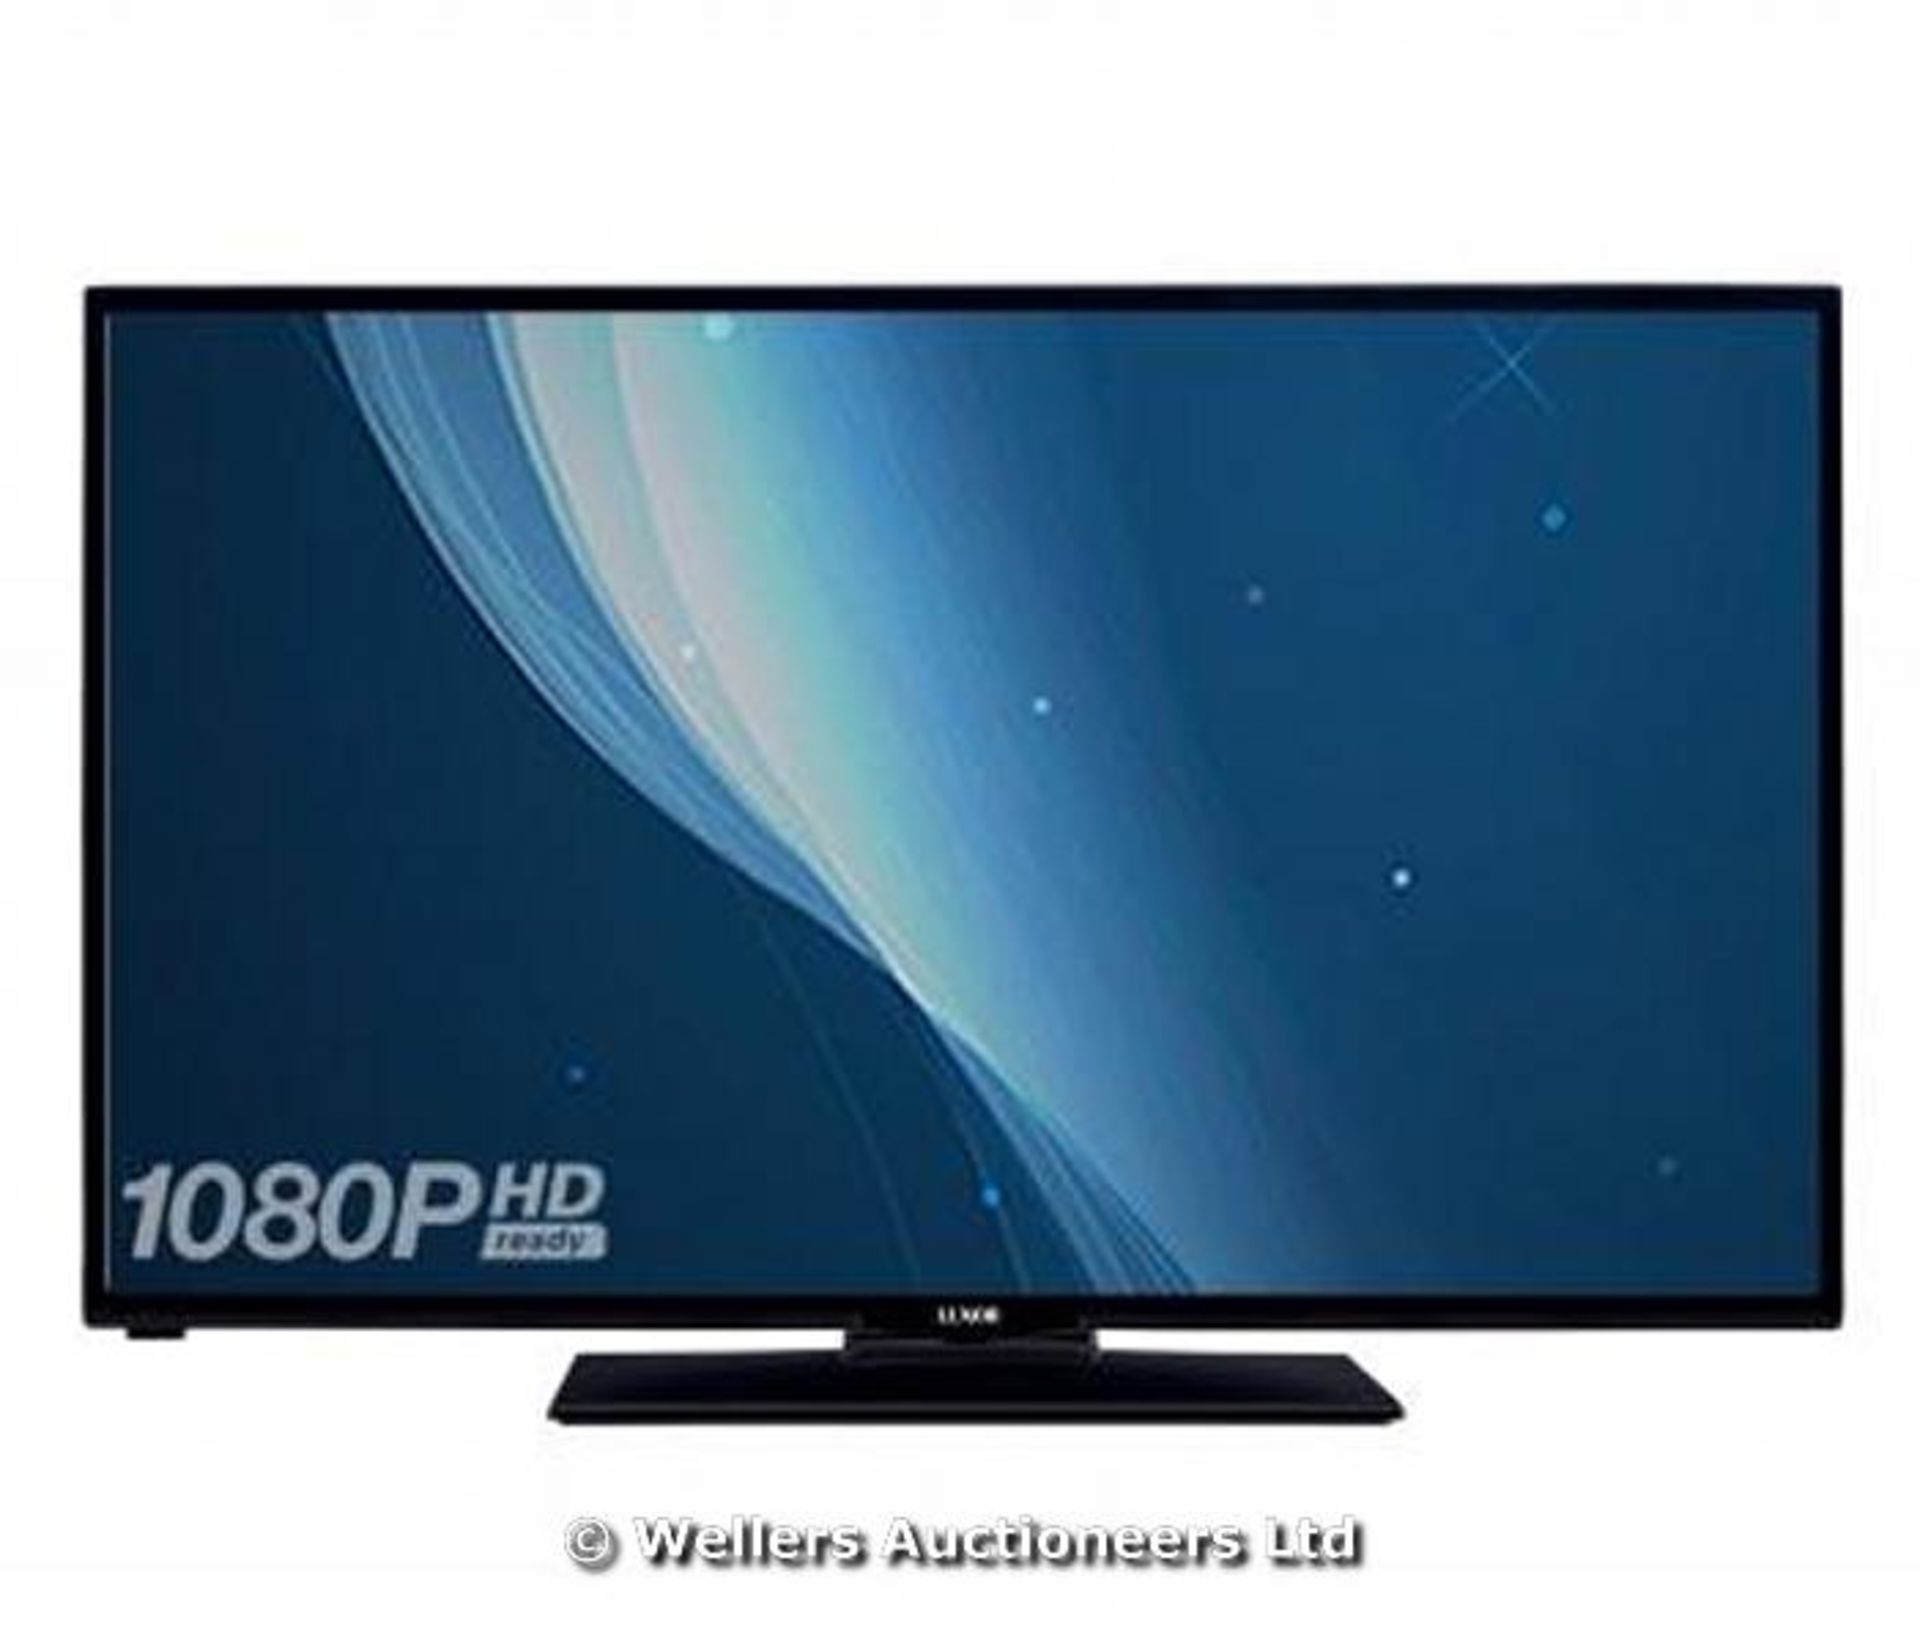 *"LUXOR 401080 40" HD LED TV WITH FREEVIEW / WITH REMOTE / WITH STAND / WITH POWER SUPPLY / POWERS